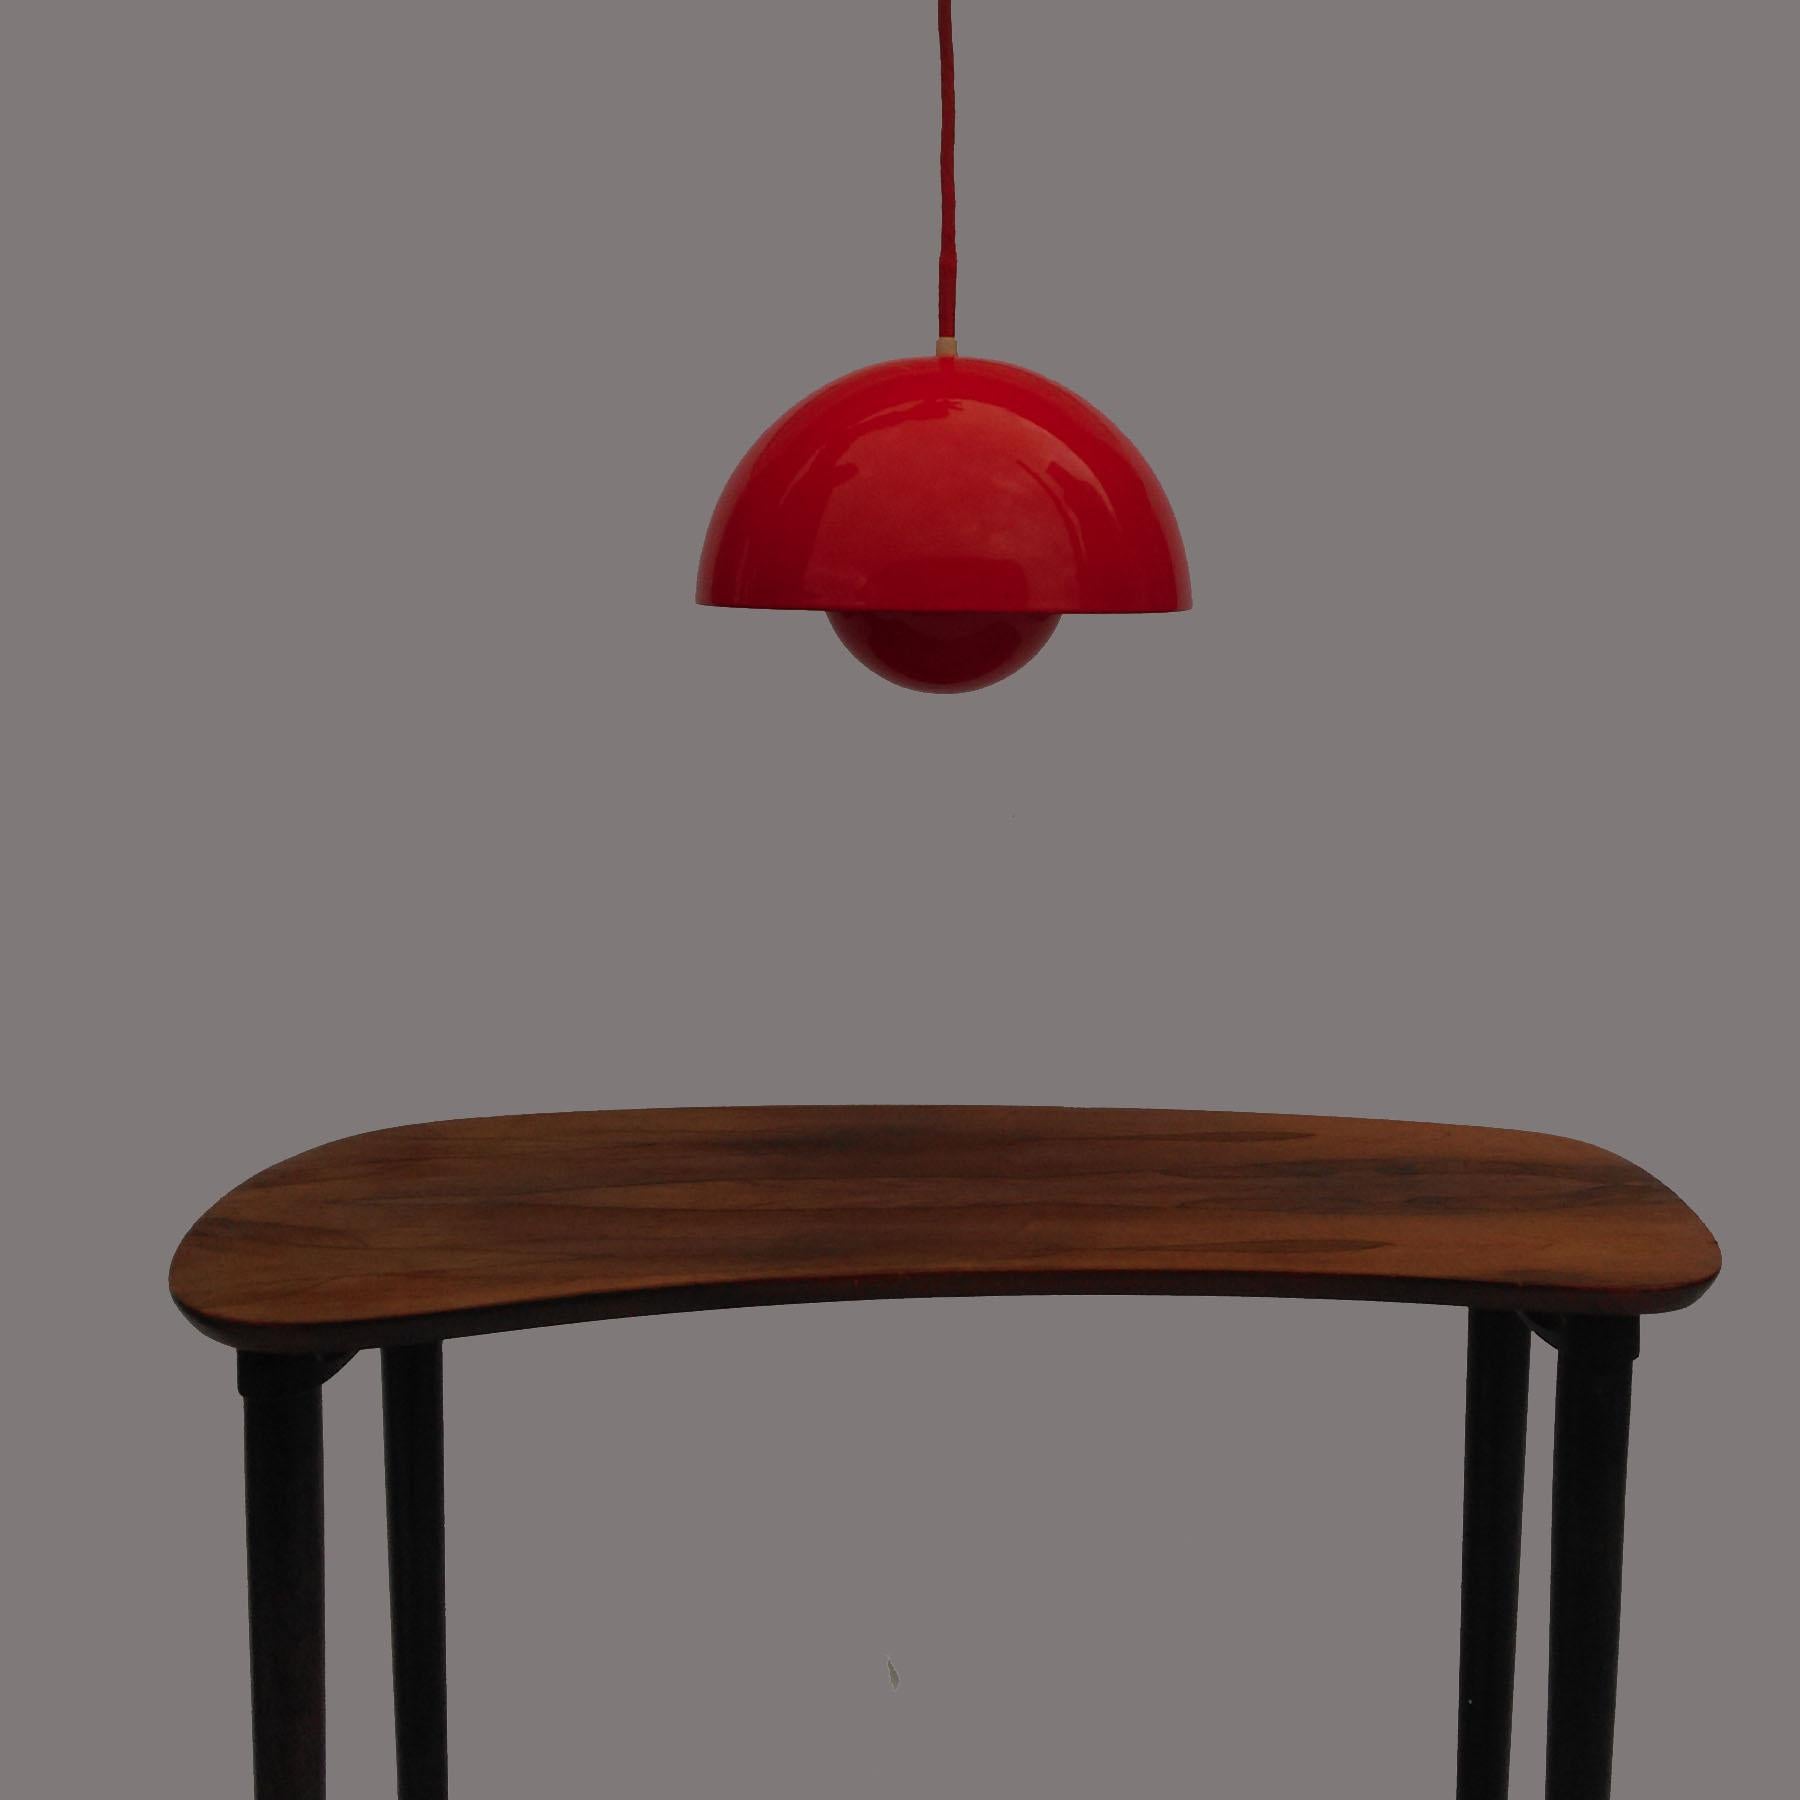 Verner Panton Danish 1´st. Edition Red Flowerpot Pendant designed for Louis Poulsen in 1969.

This pendant is the 1´st. edition in enamel and feature a red enamel lampshade consisting of two semi-circular spheres facing each other. The later models